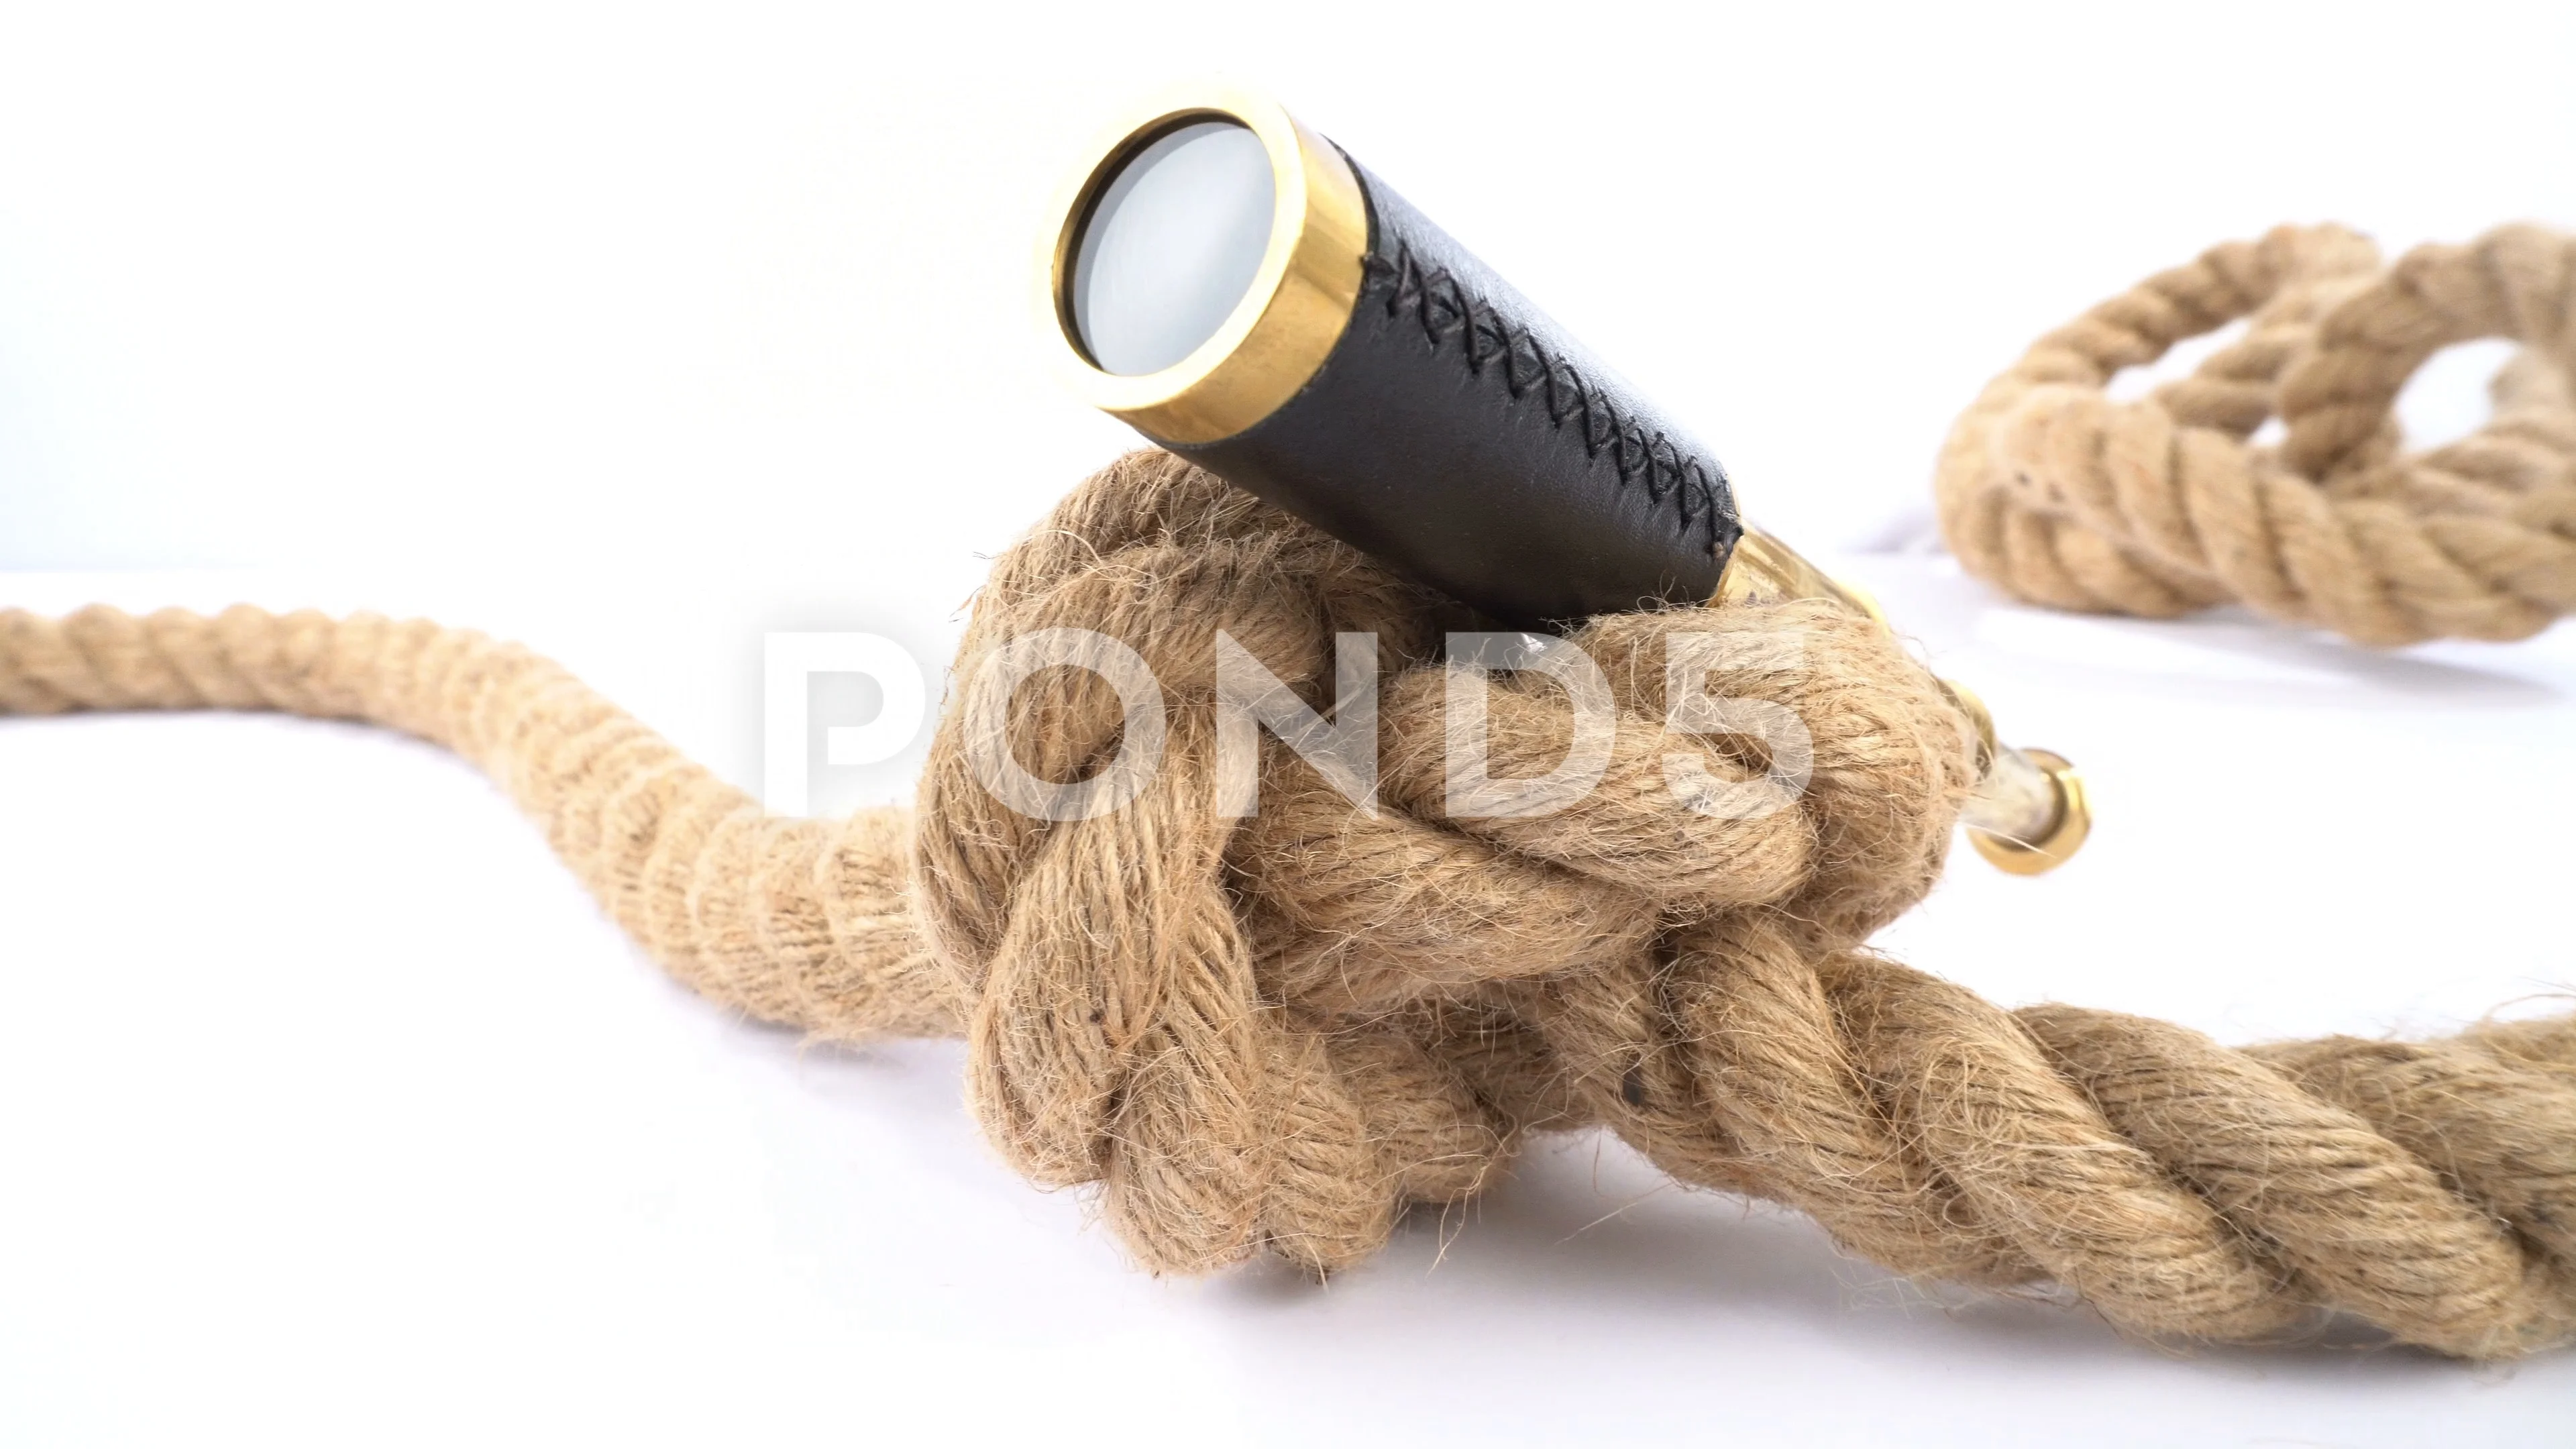 Strong Rope with a Knot and Telescope is, Stock Video